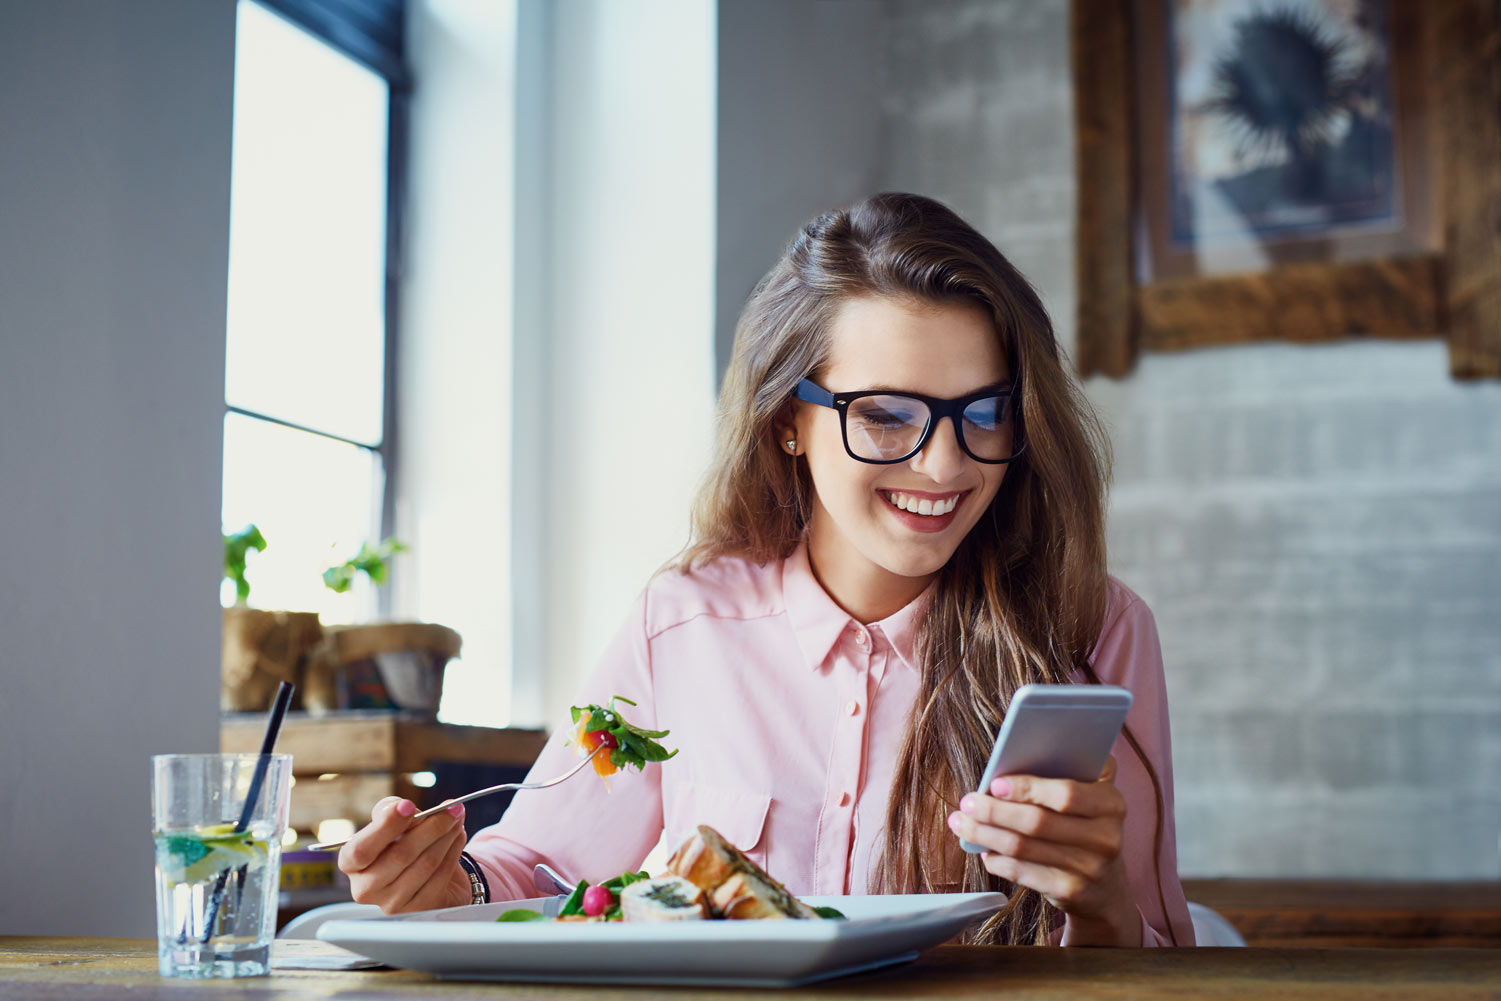 Am I Addicted To My Phone? Quiz Woman Eating And Using Phone